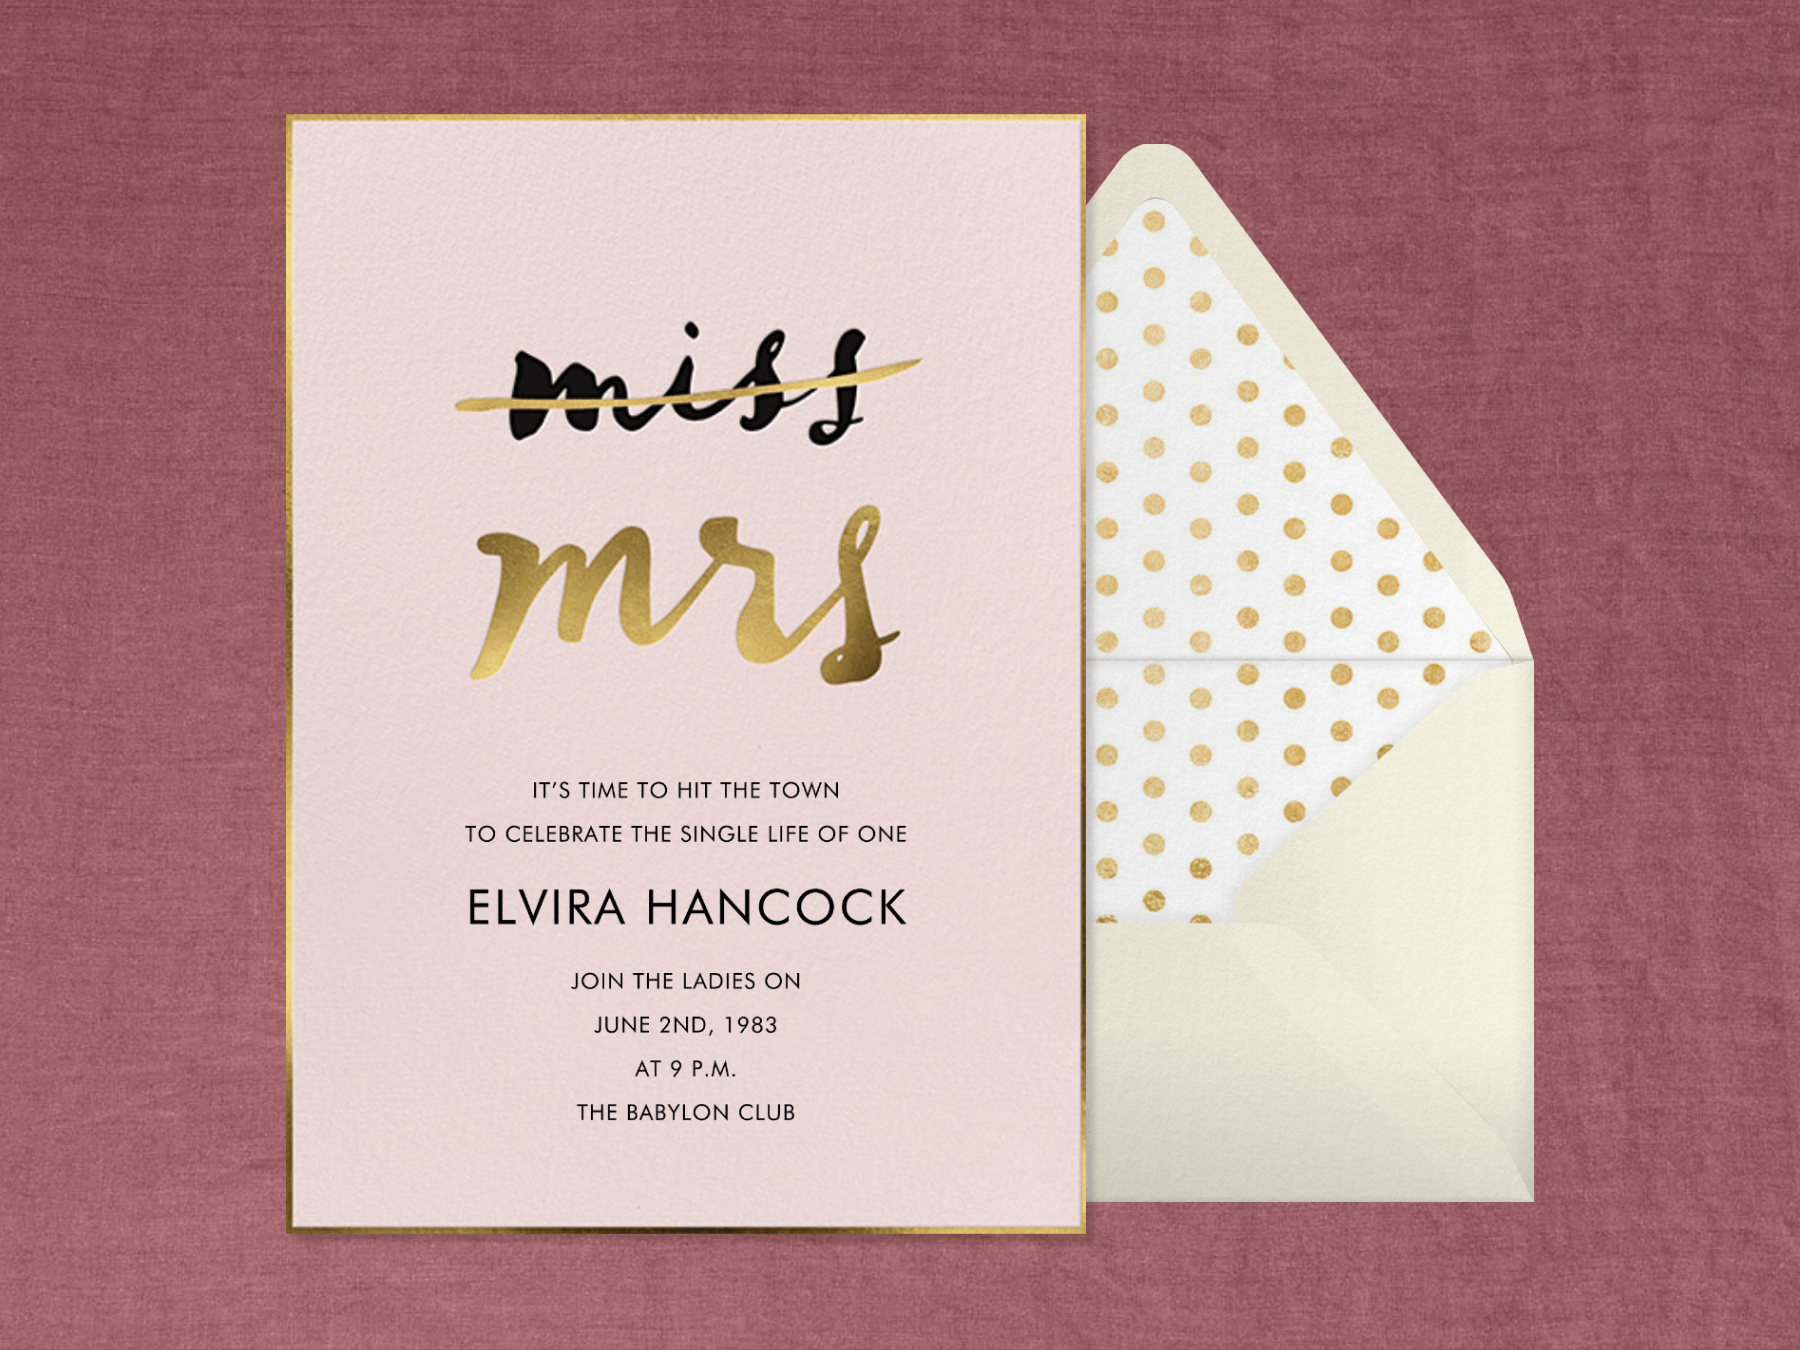 A light pink bachelorette party invitation with the word “miss” struck out and “mrs” in gold and a thin gold border next to a cream envelope with gold polka dot liner.